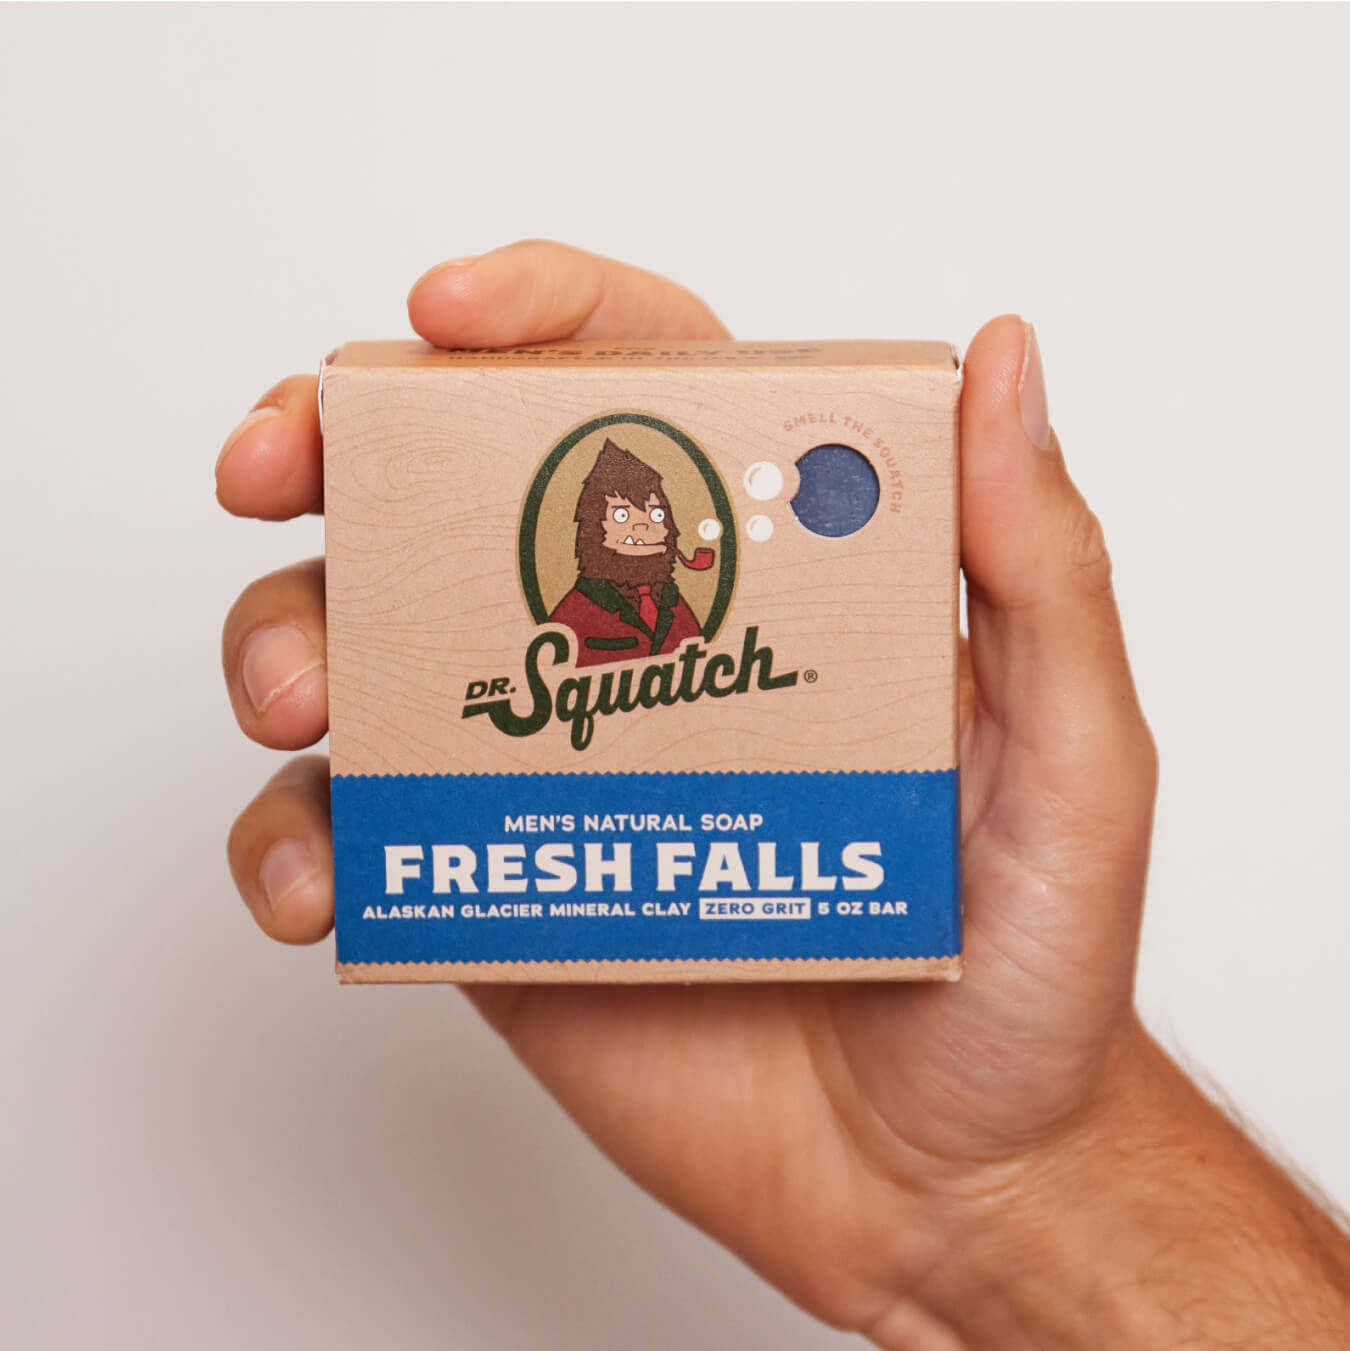 Dr. Squatch - New packaging who dis? After many years we have